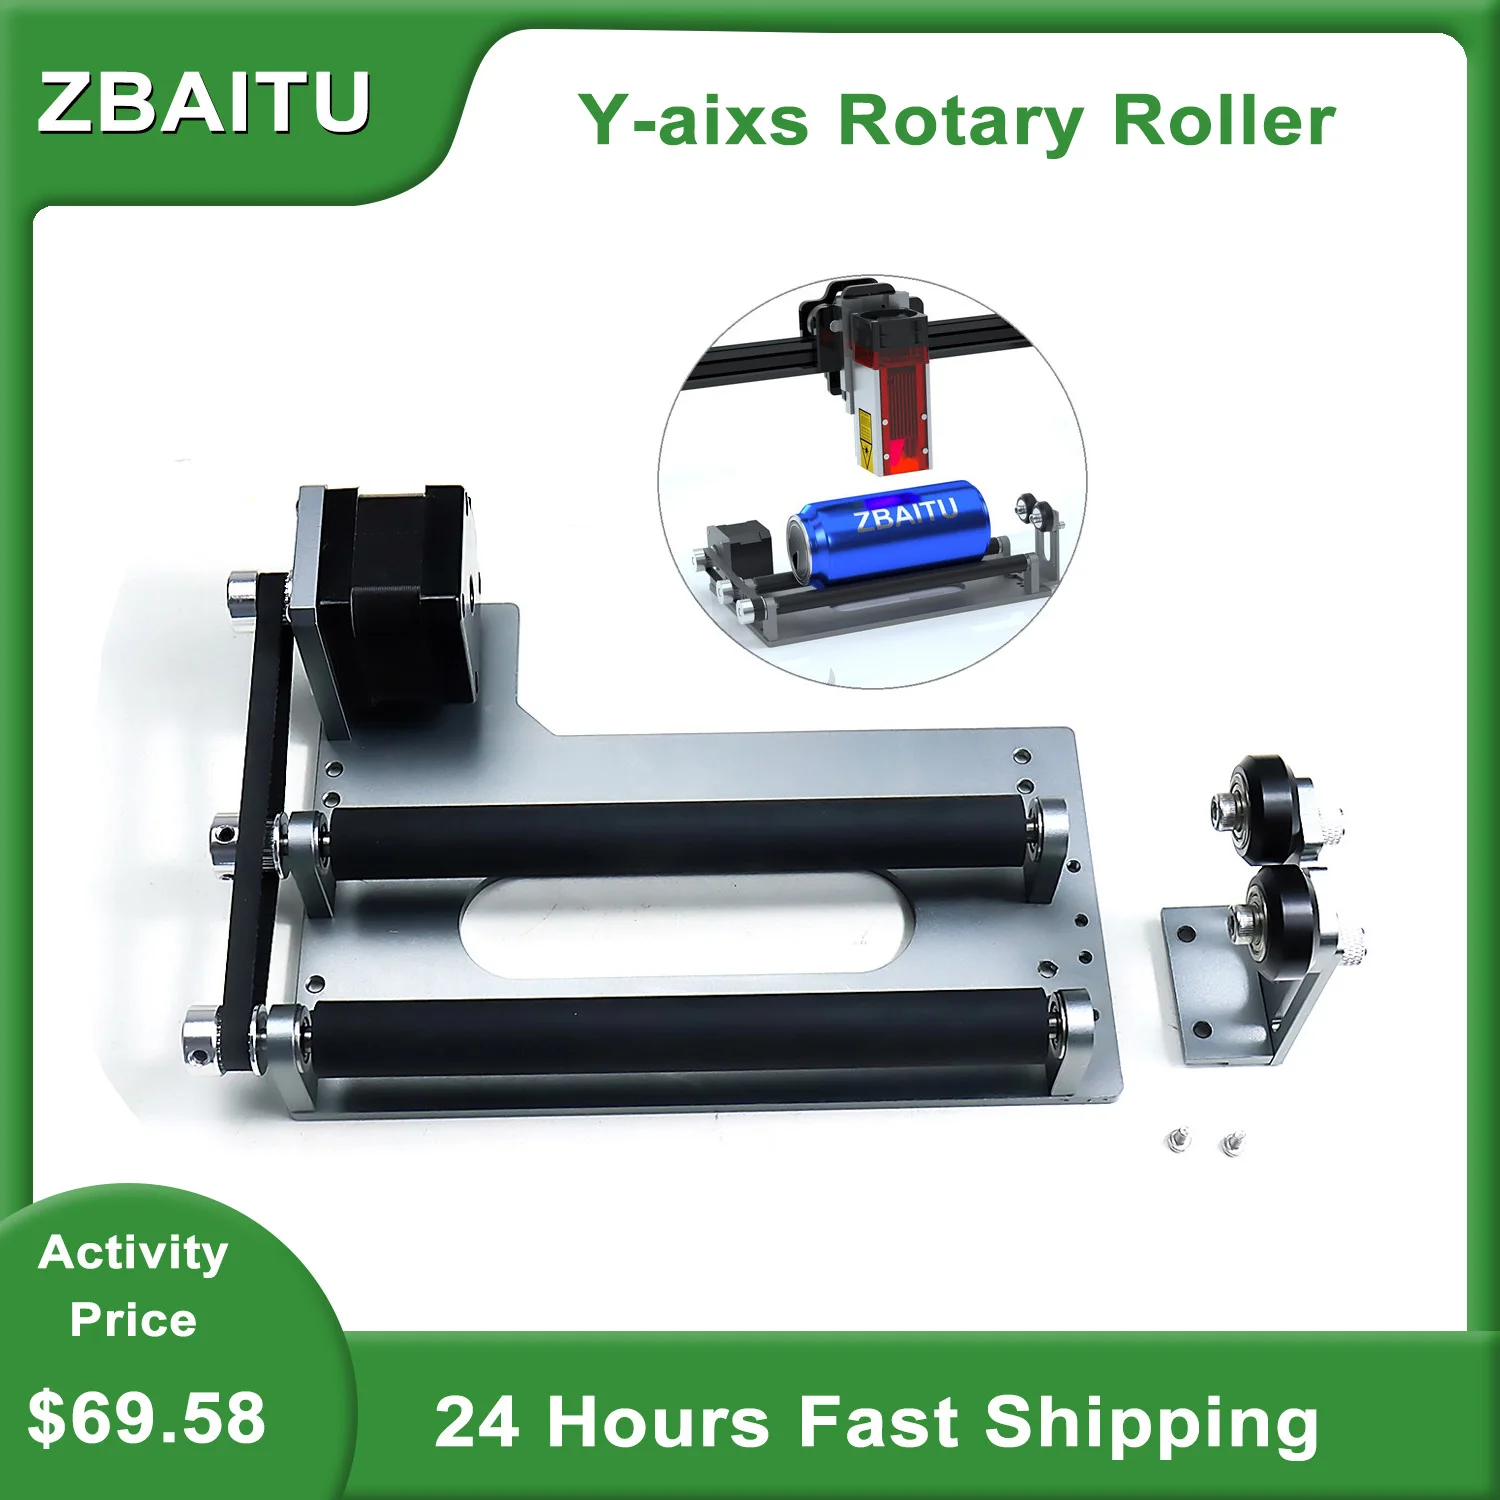 CNC Y-axis Laser Rotary Roller Wood Cutting Laser Engraver Engraving Module For DIY Cylindrical Objects Cans 360 Degree Rotating